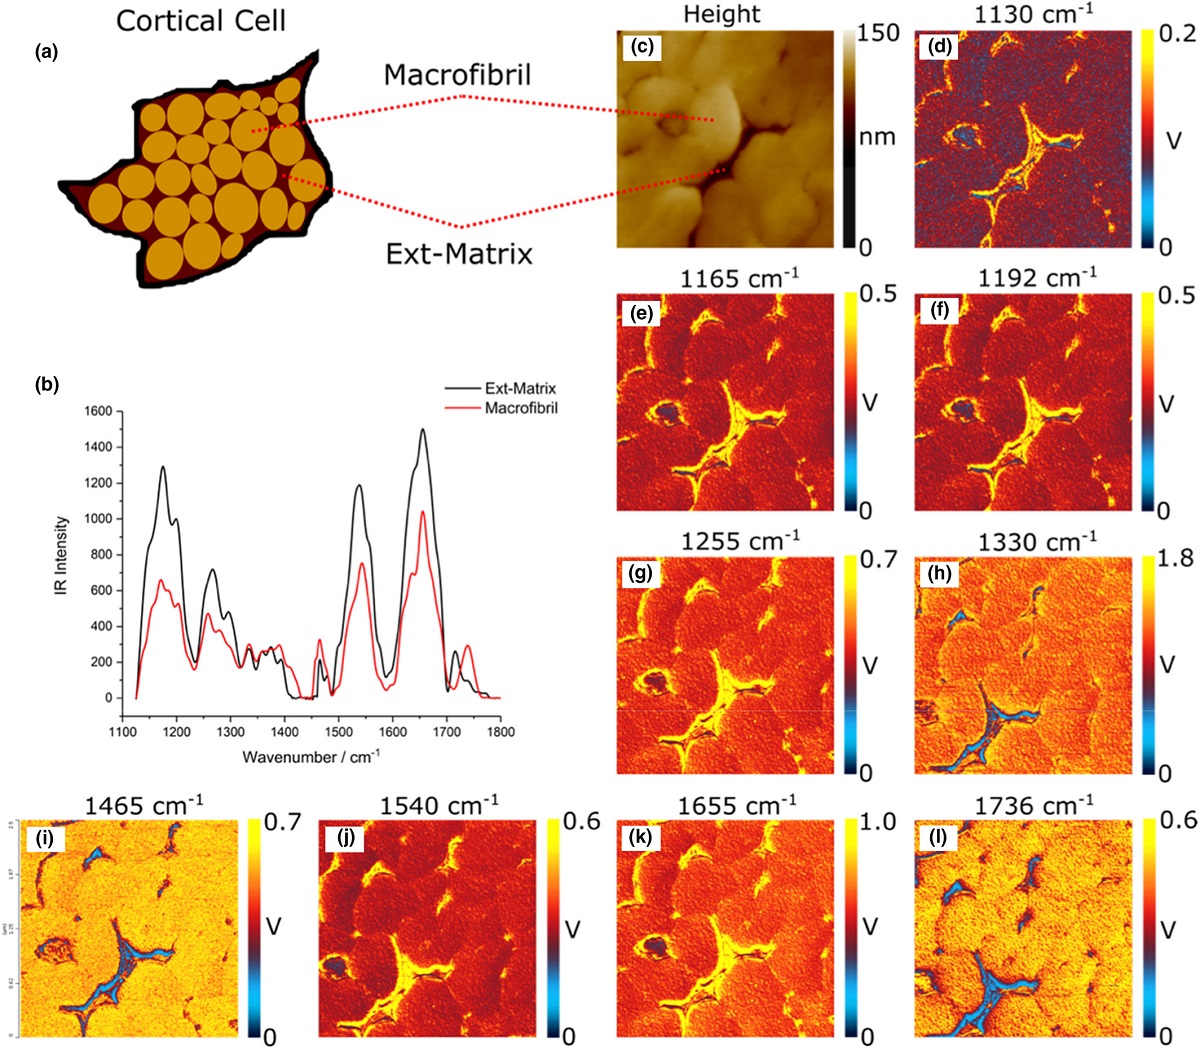 Figure 2 from A. P. Fellows et al “Chemically characterizing the cortical cell nano-structure of human hair using atomic force microscopy integrated with infrared spectroscopy (AFM-IR)”:AFM-IR data obtained from a human hair cross-section (approx. 300 nm thick) showing (a) a schematic structural representation of the cortical cell (b) average spectra corresponding to each observed region (macrofibril and Ext-matrix) (c) AFM height map and (d)-(l) IR-intensity maps recorded in contact mode across a 2.5 × 2.5 μm region of the surface at a number of different infrared frequencies corresponding to contributions observed in the spectra (each shown above the corresponding image) for a representative fibre section. NANOSENSORS AdvancedTEC ATEC-CONTAu tip view AFM probes were used. 